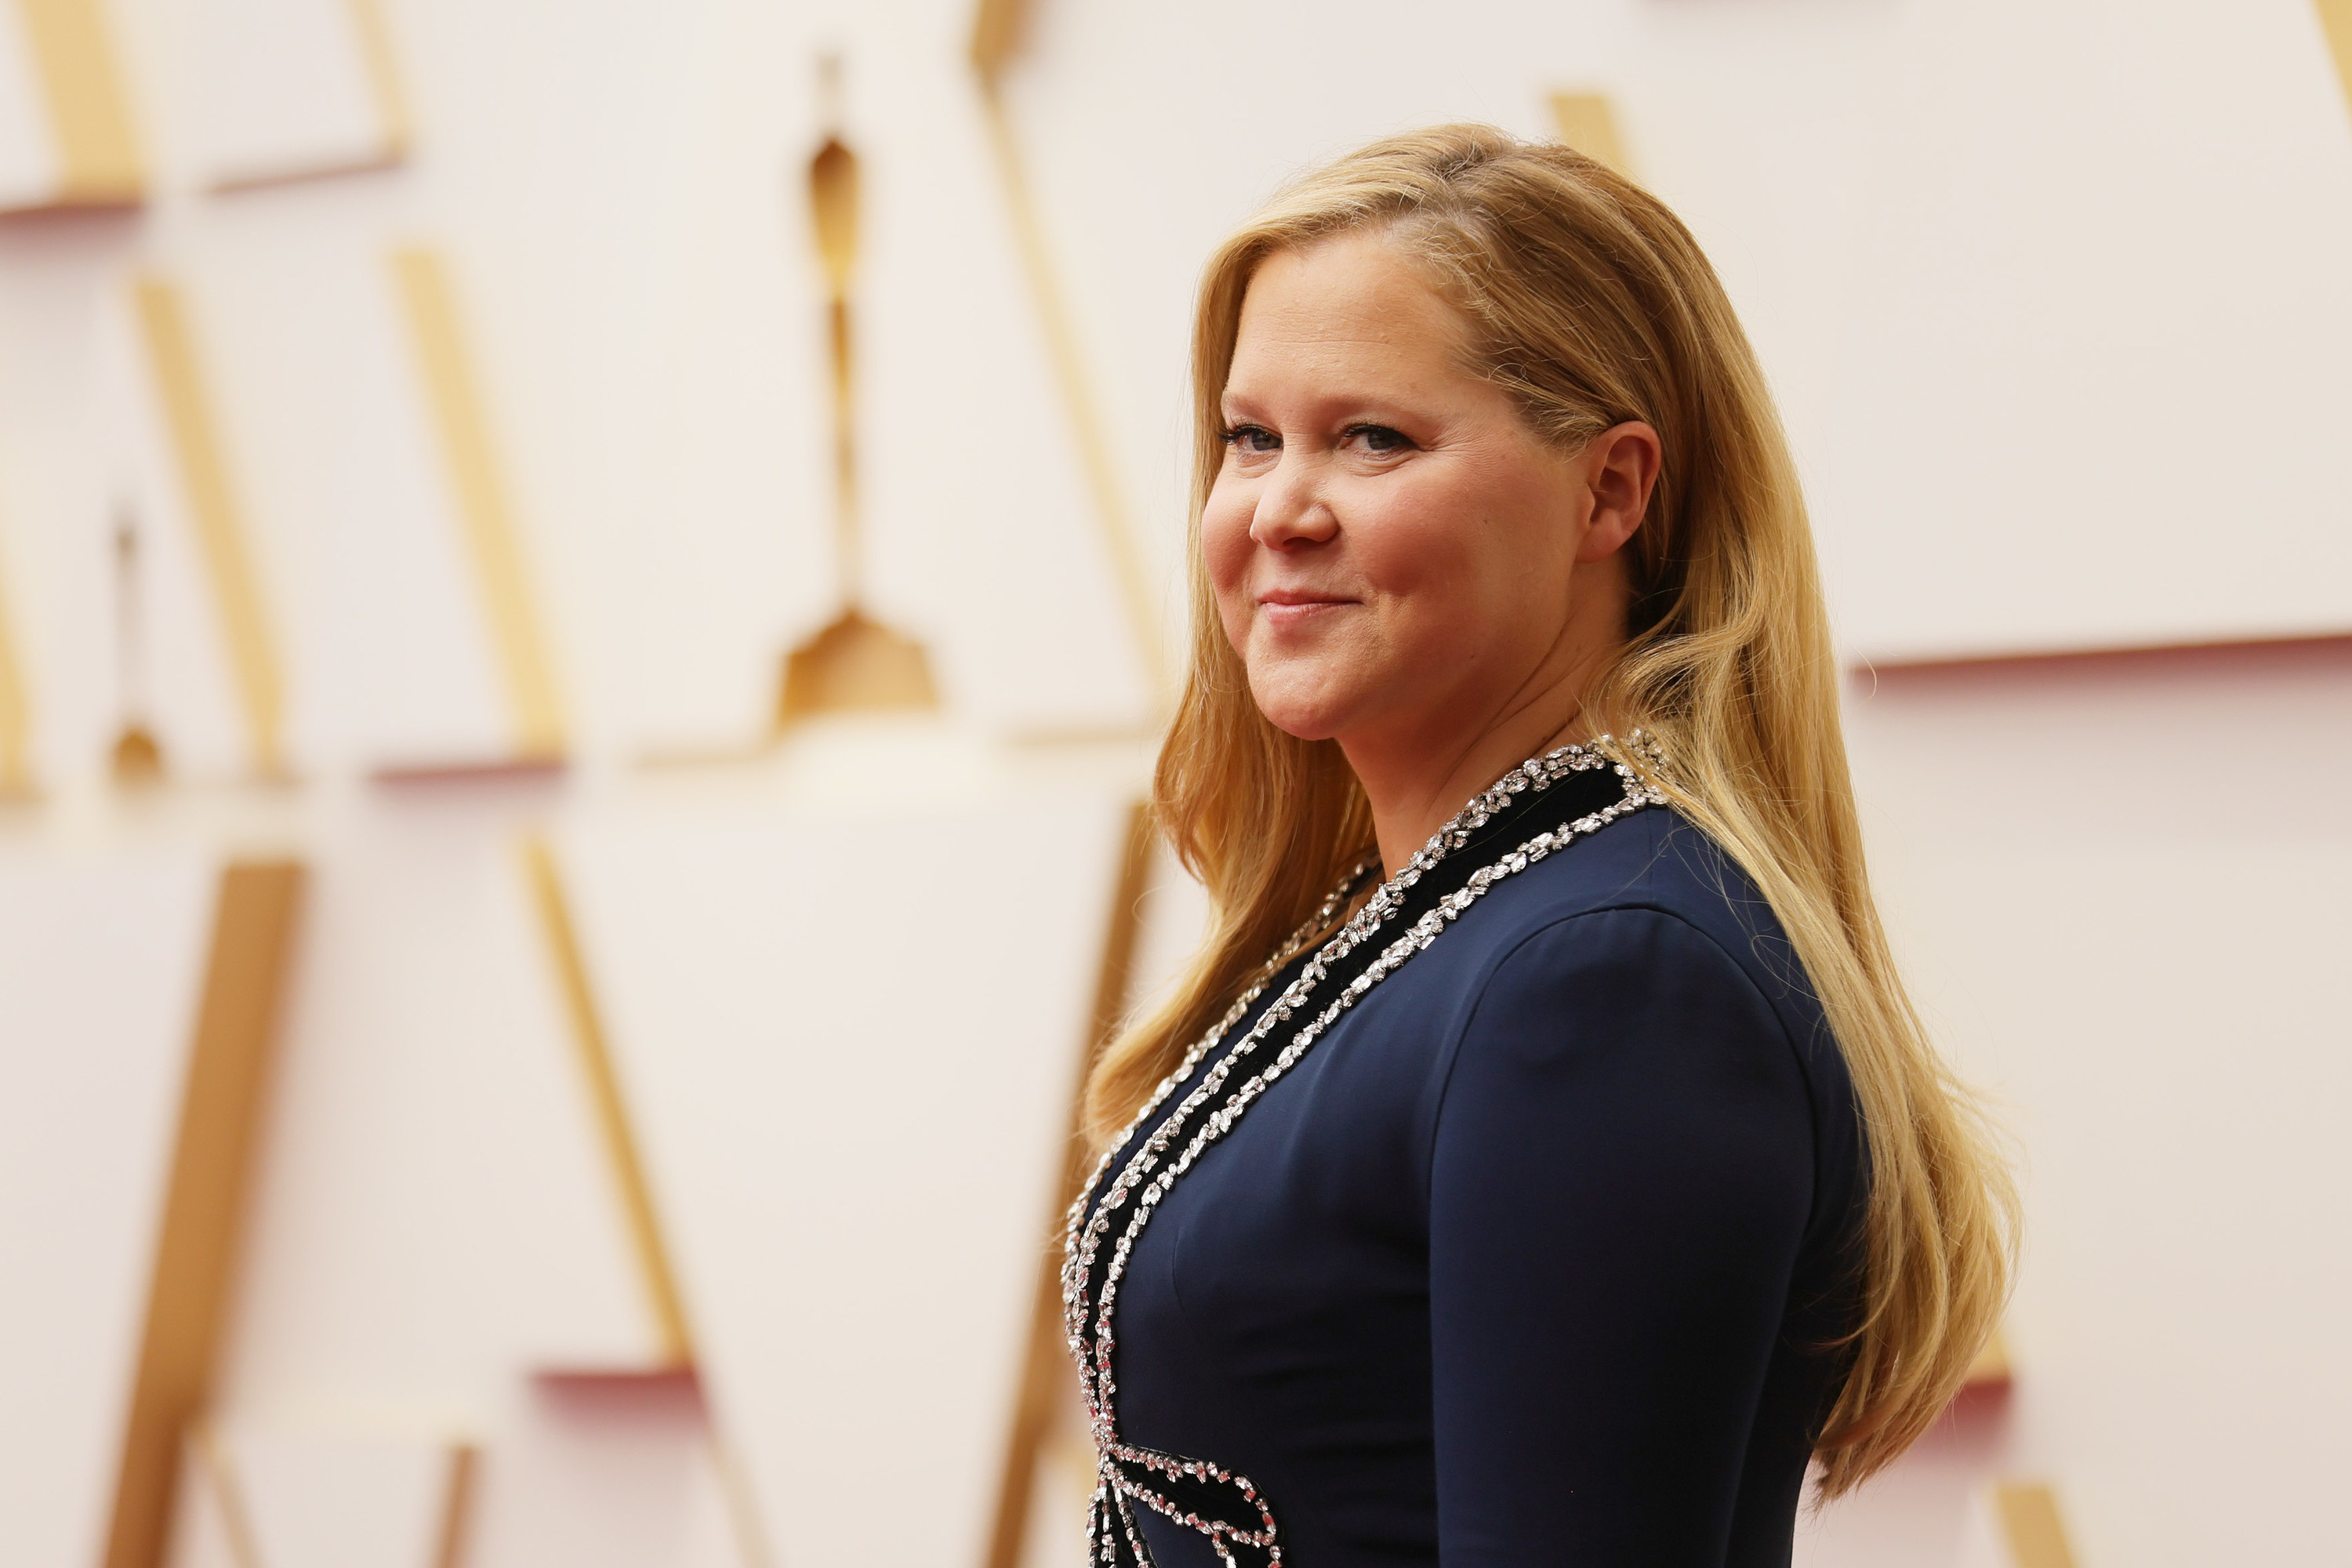 Amy schumer at the 2022 oscars